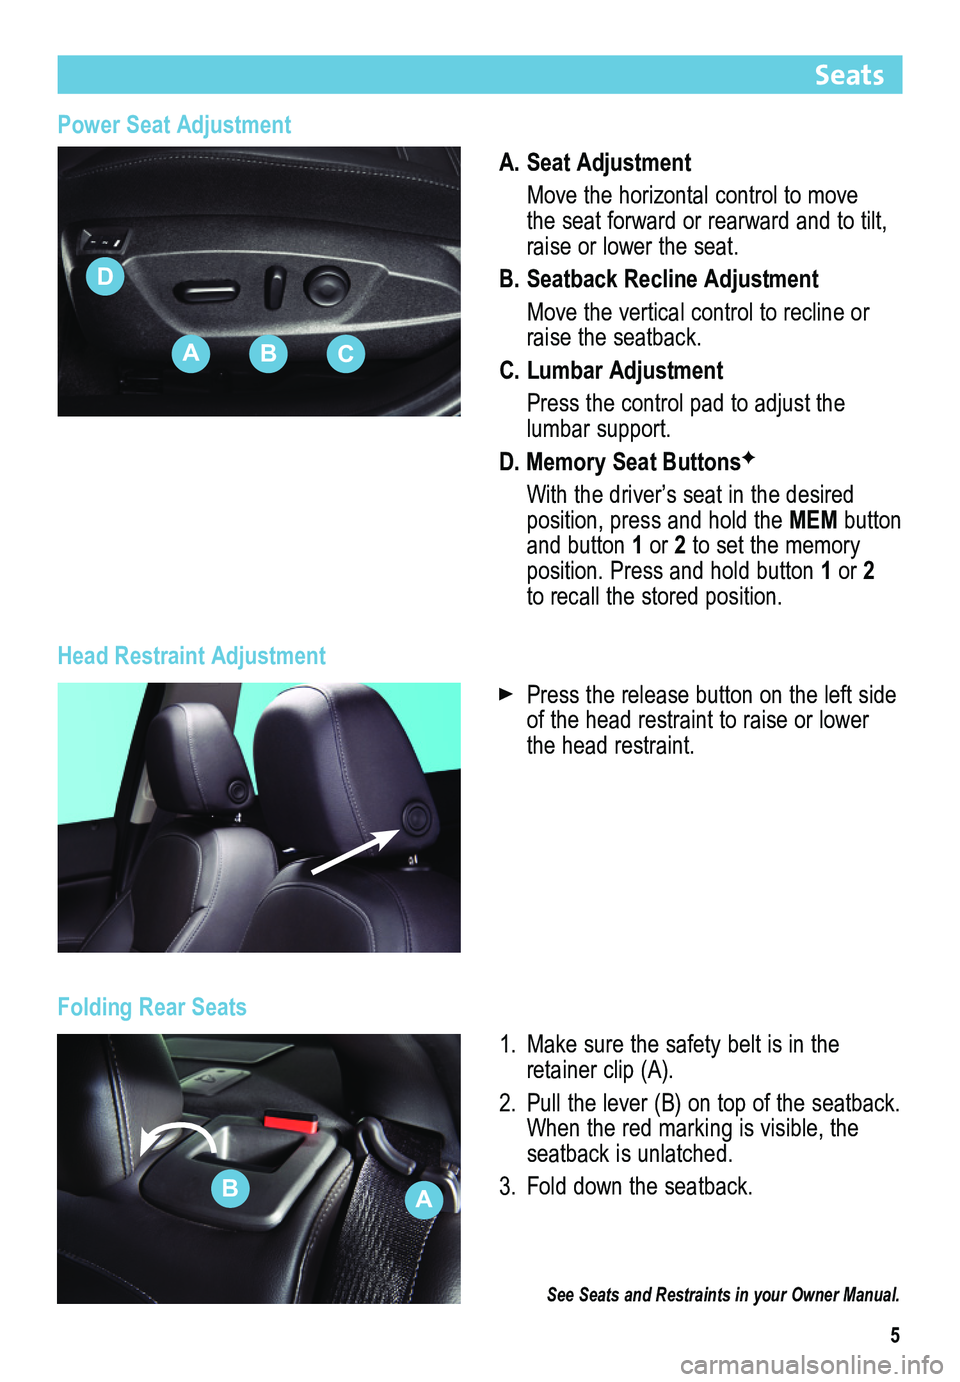 BUICK REGAL 2014  Get To Know Guide 5
Power Seat Adjustment
A. Seat Adjustment
 Move the horizontal control to move the seat forward or rearward and to tilt, raise or lower the seat.
B. Seatback Recline Adjustment
 Move the vertical con